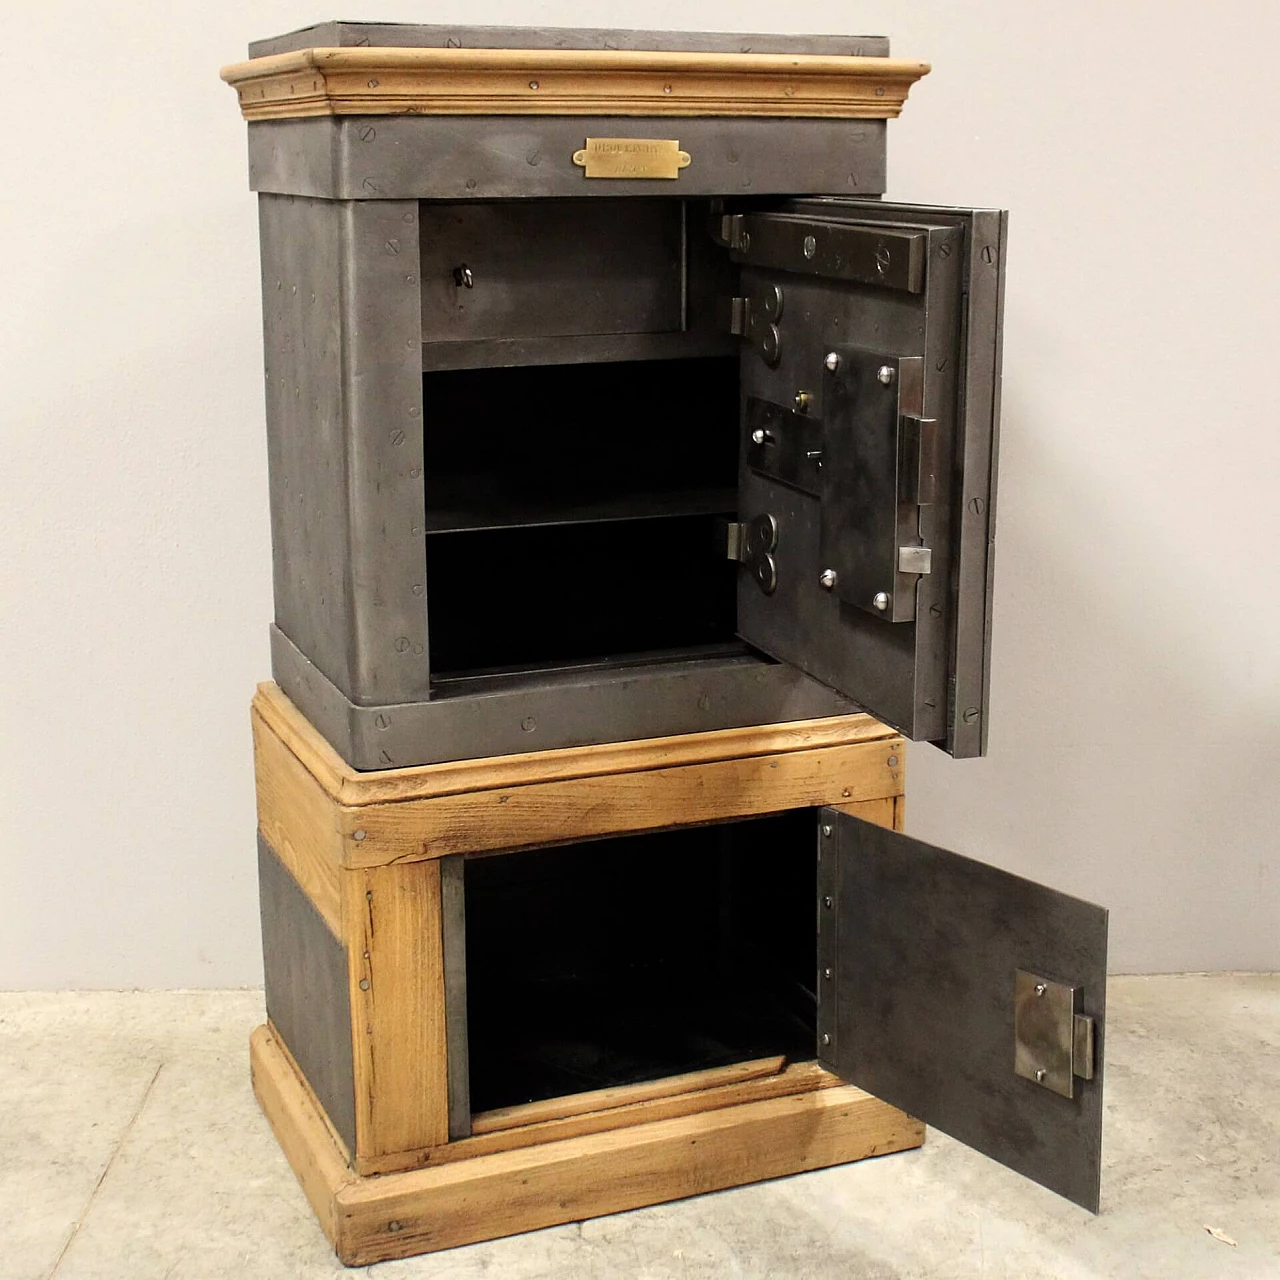 Iron and wood safe, late 19th century 5